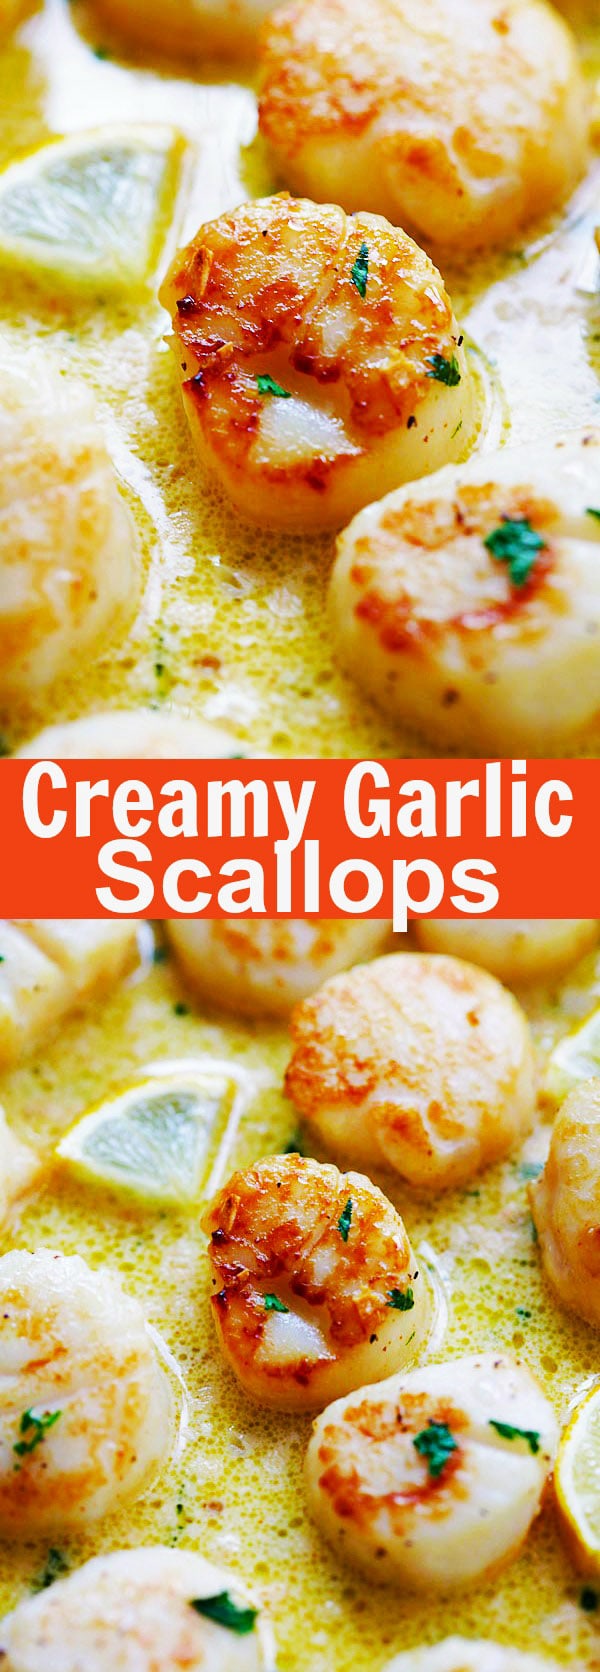 Creamy Garlic Scallops - easiest, creamiest and best scallop recipe ever. Takes only 15 mins, better than restaurants and much cheaper | rasamalaysia.com